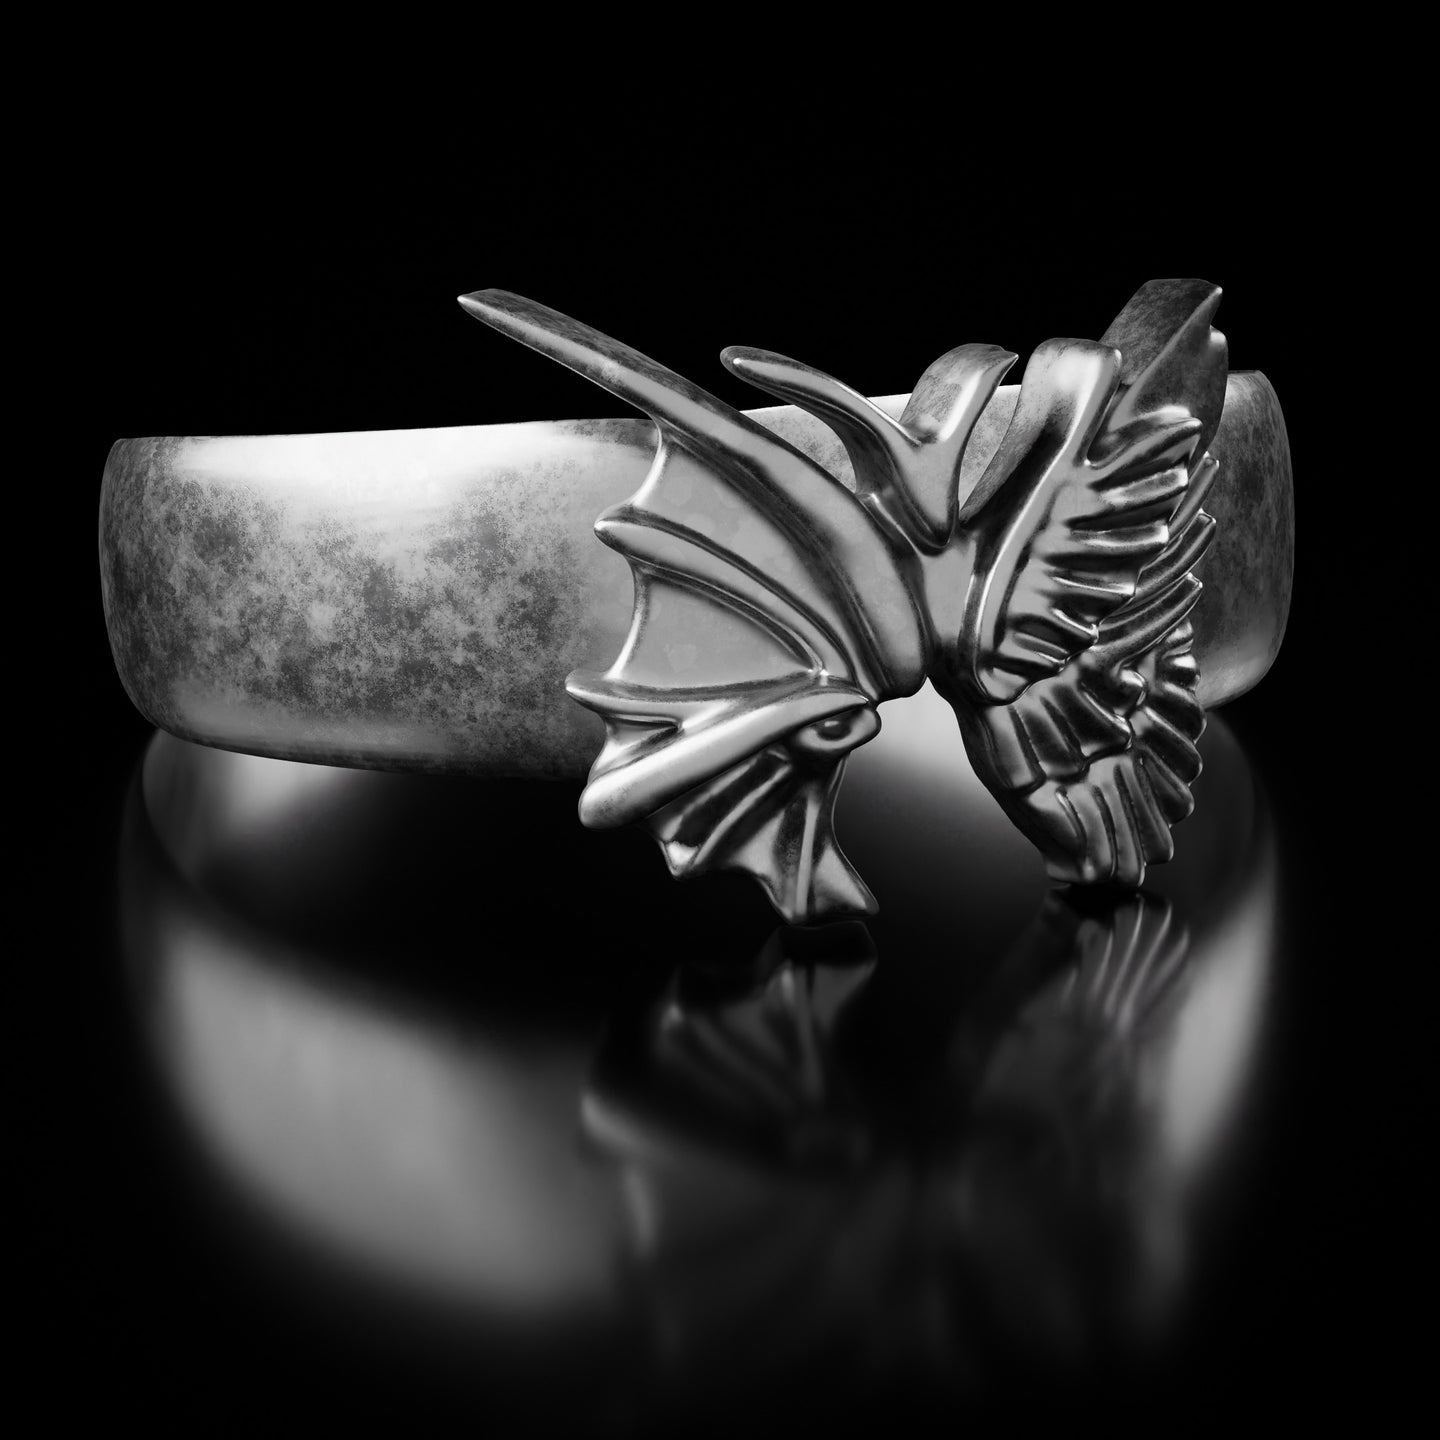 Silver Butterfly Angel Ring